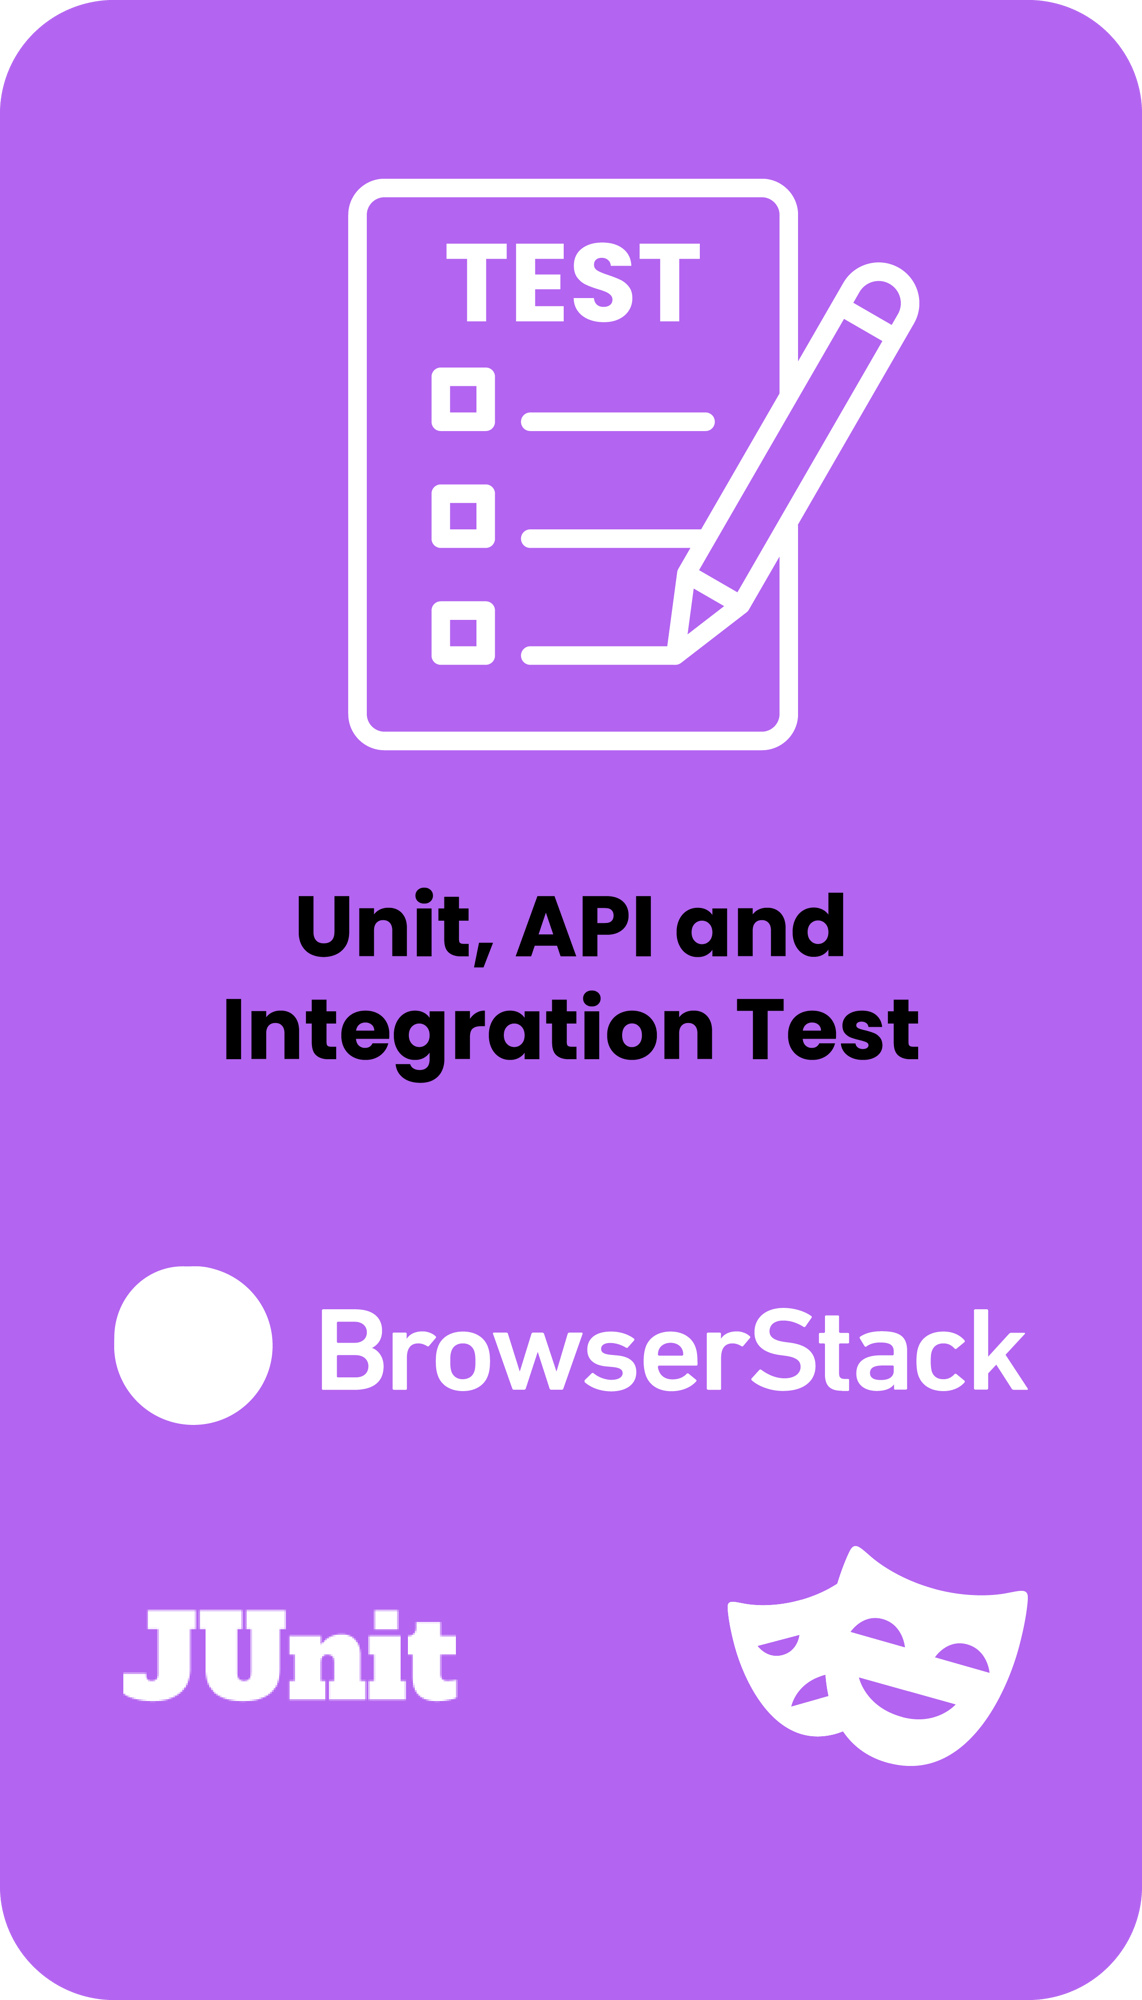 Unit, API and Integration Test. Technologies include BrowserStack, Playwright, and JUnit.